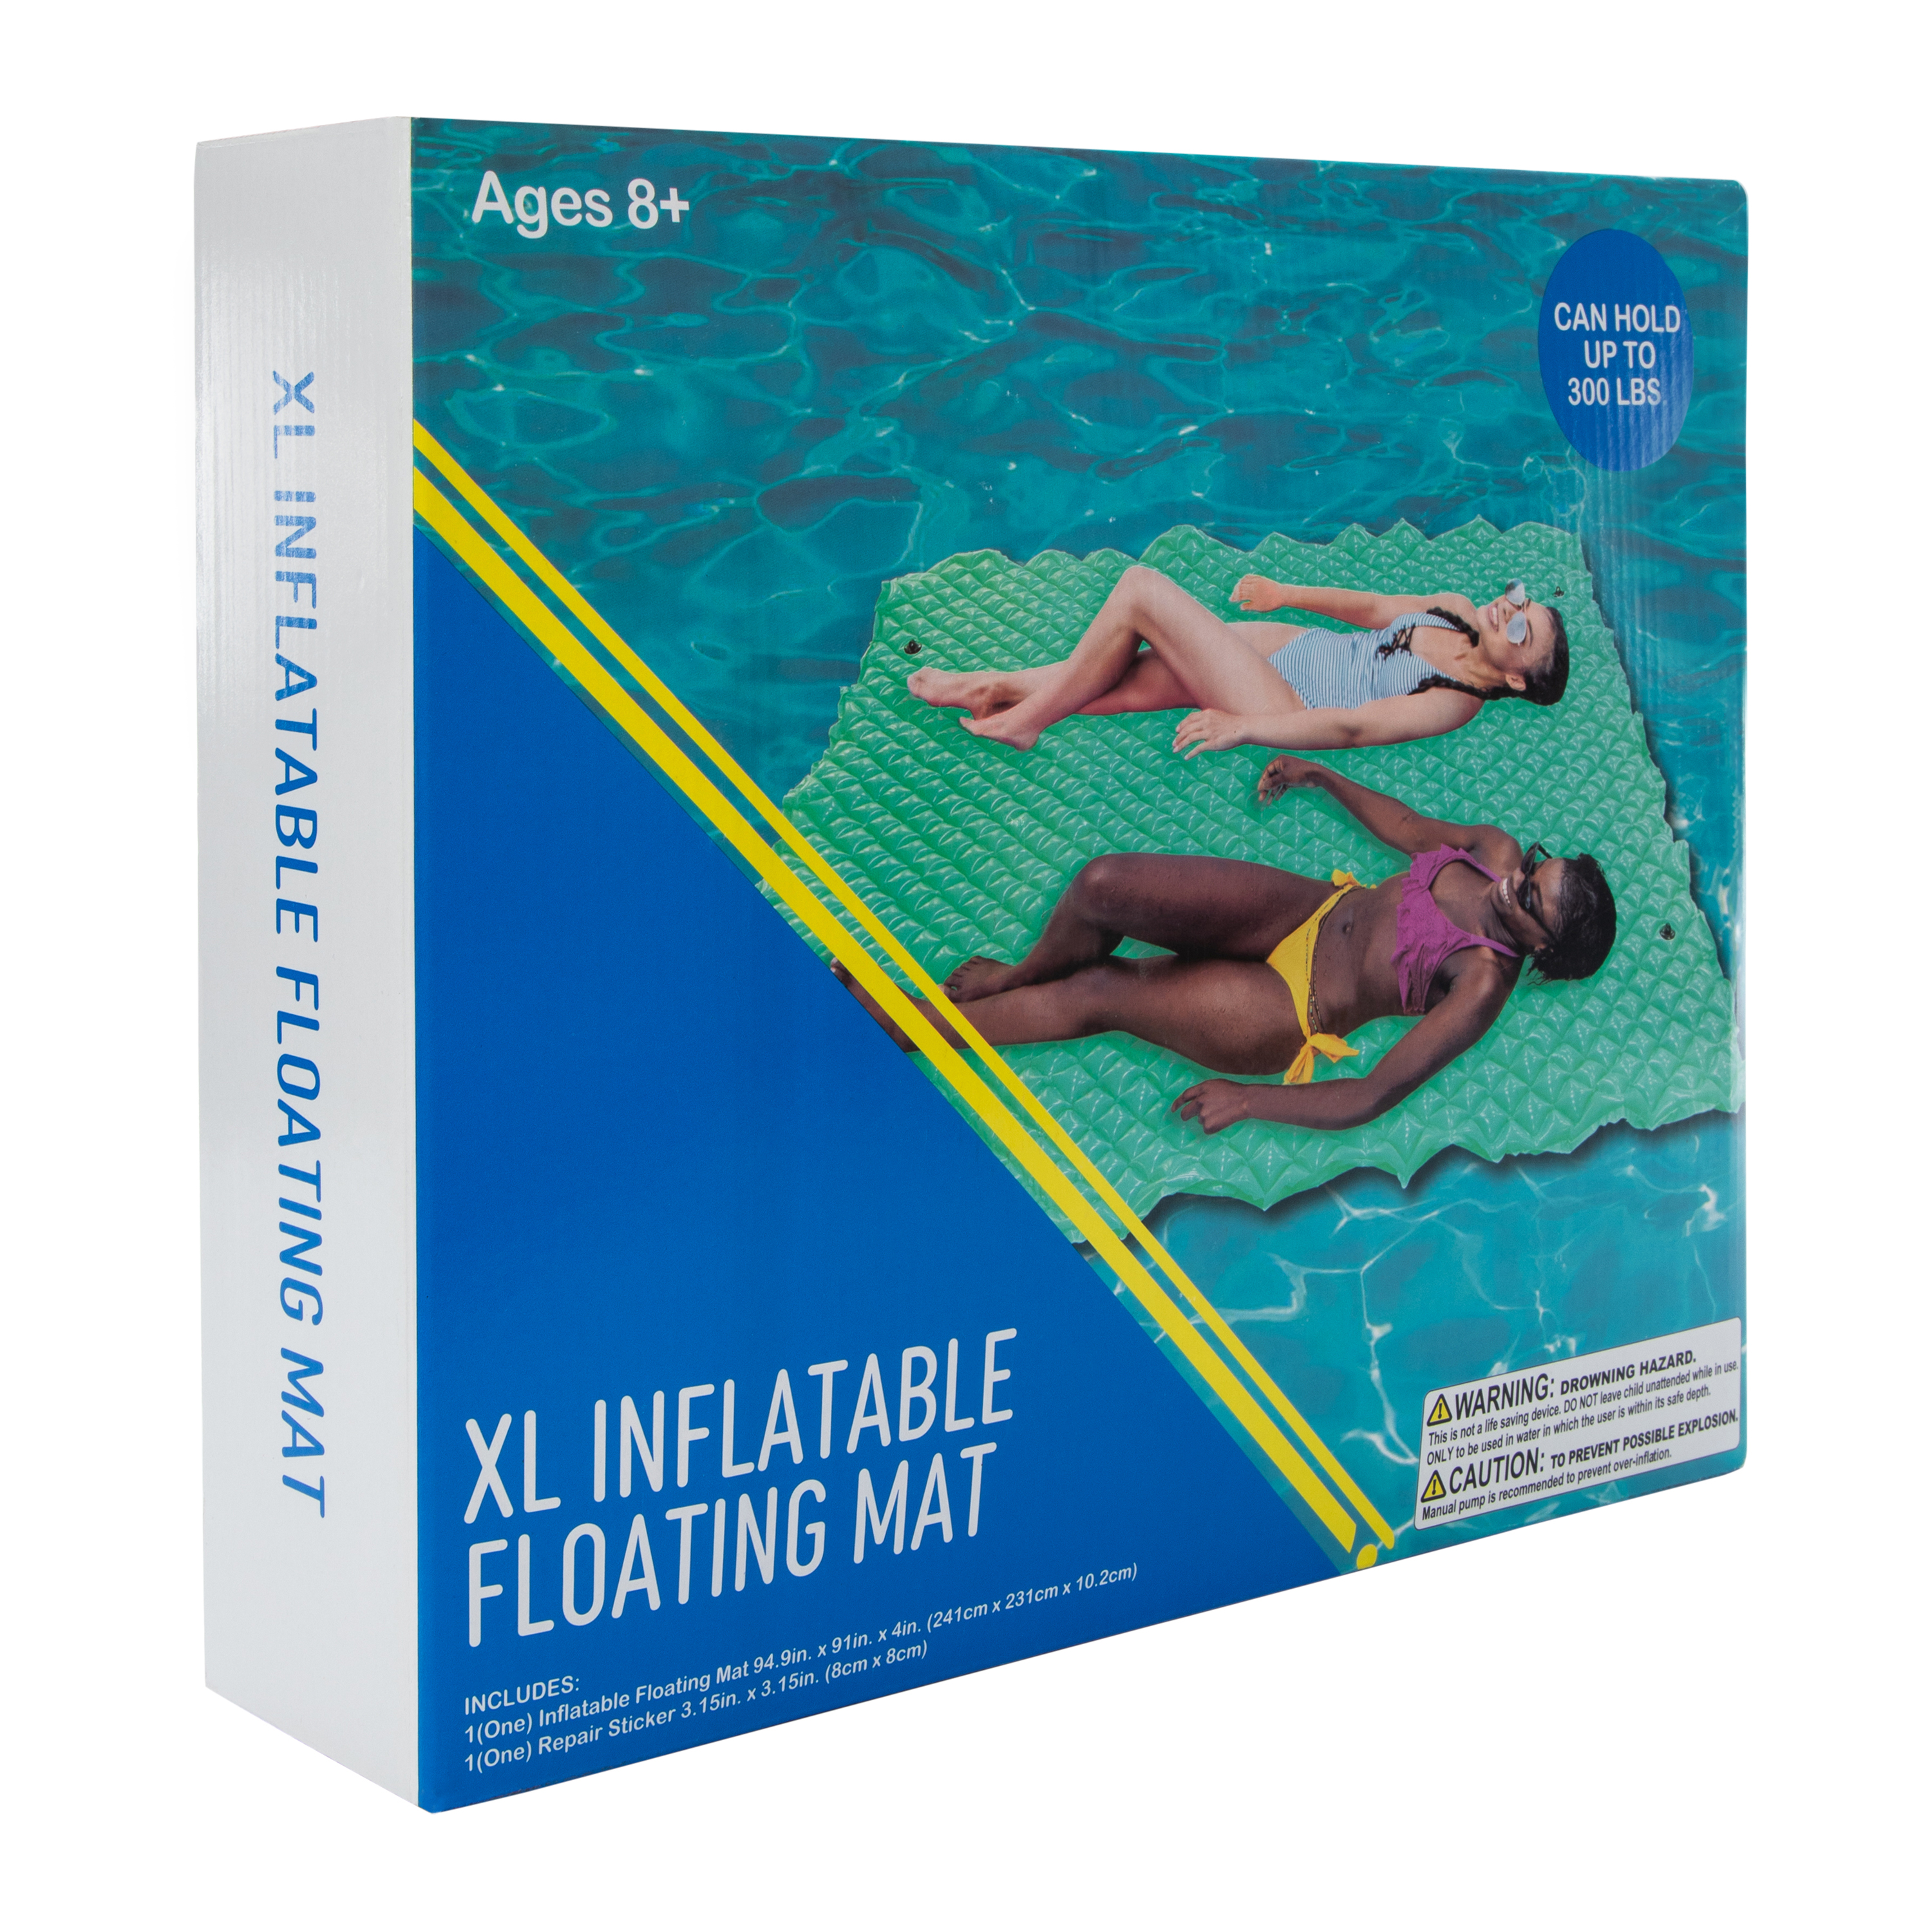 XL Inflatable Floating Pool Mat 91in x 94.9in